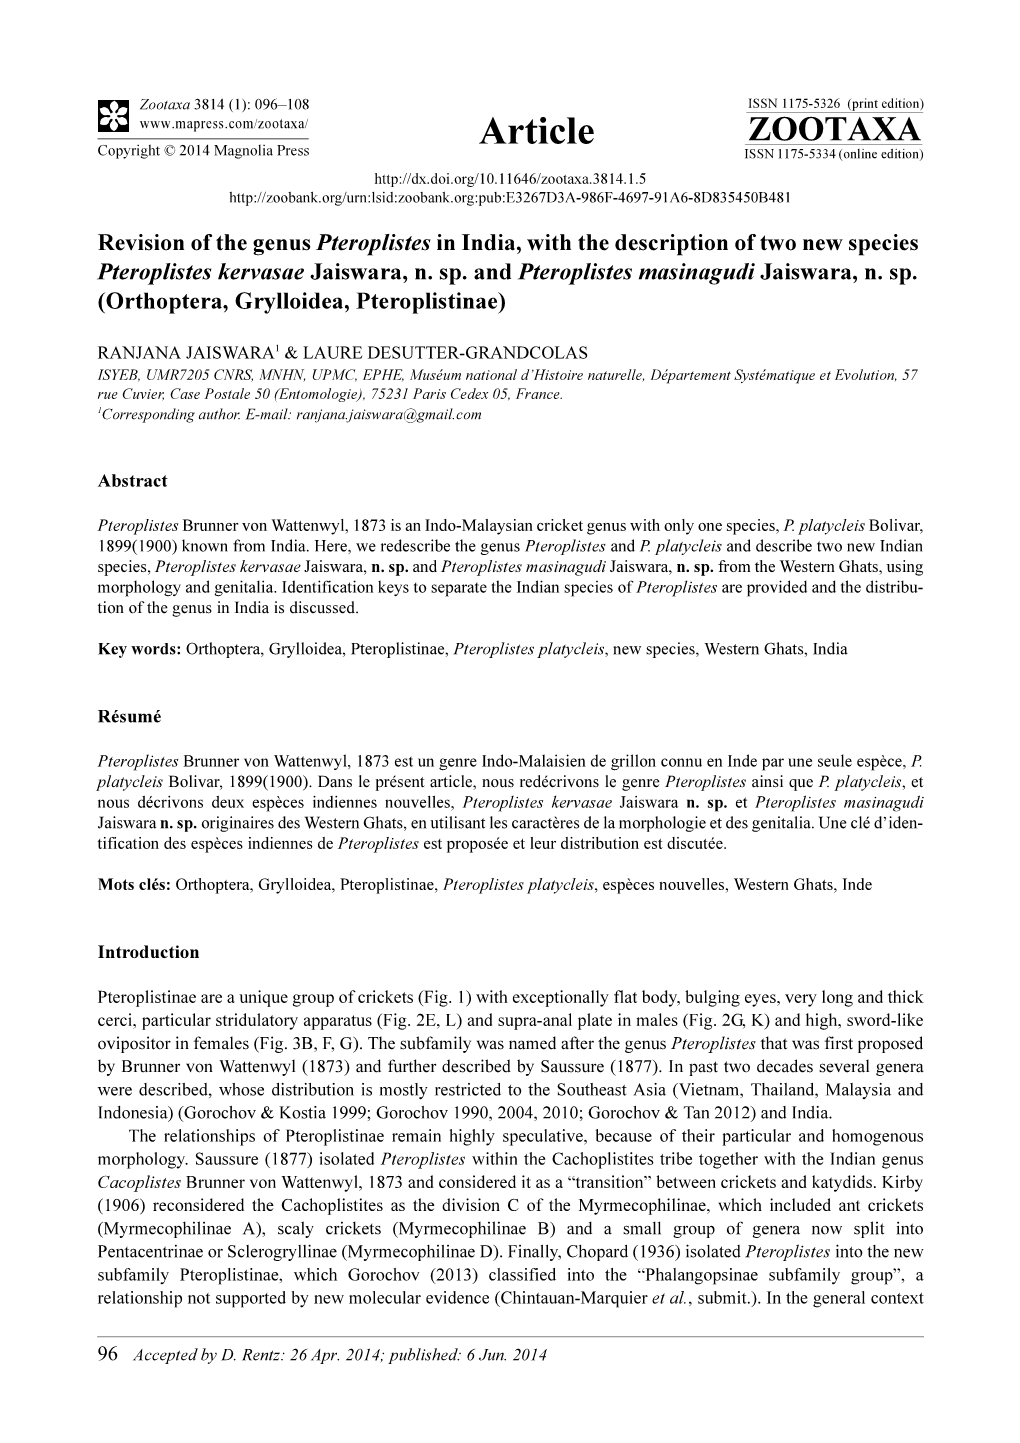 Revision of the Genus Pteroplistes in India, with the Description of Two New Species Pteroplistes Kervasae Jaiswara, N